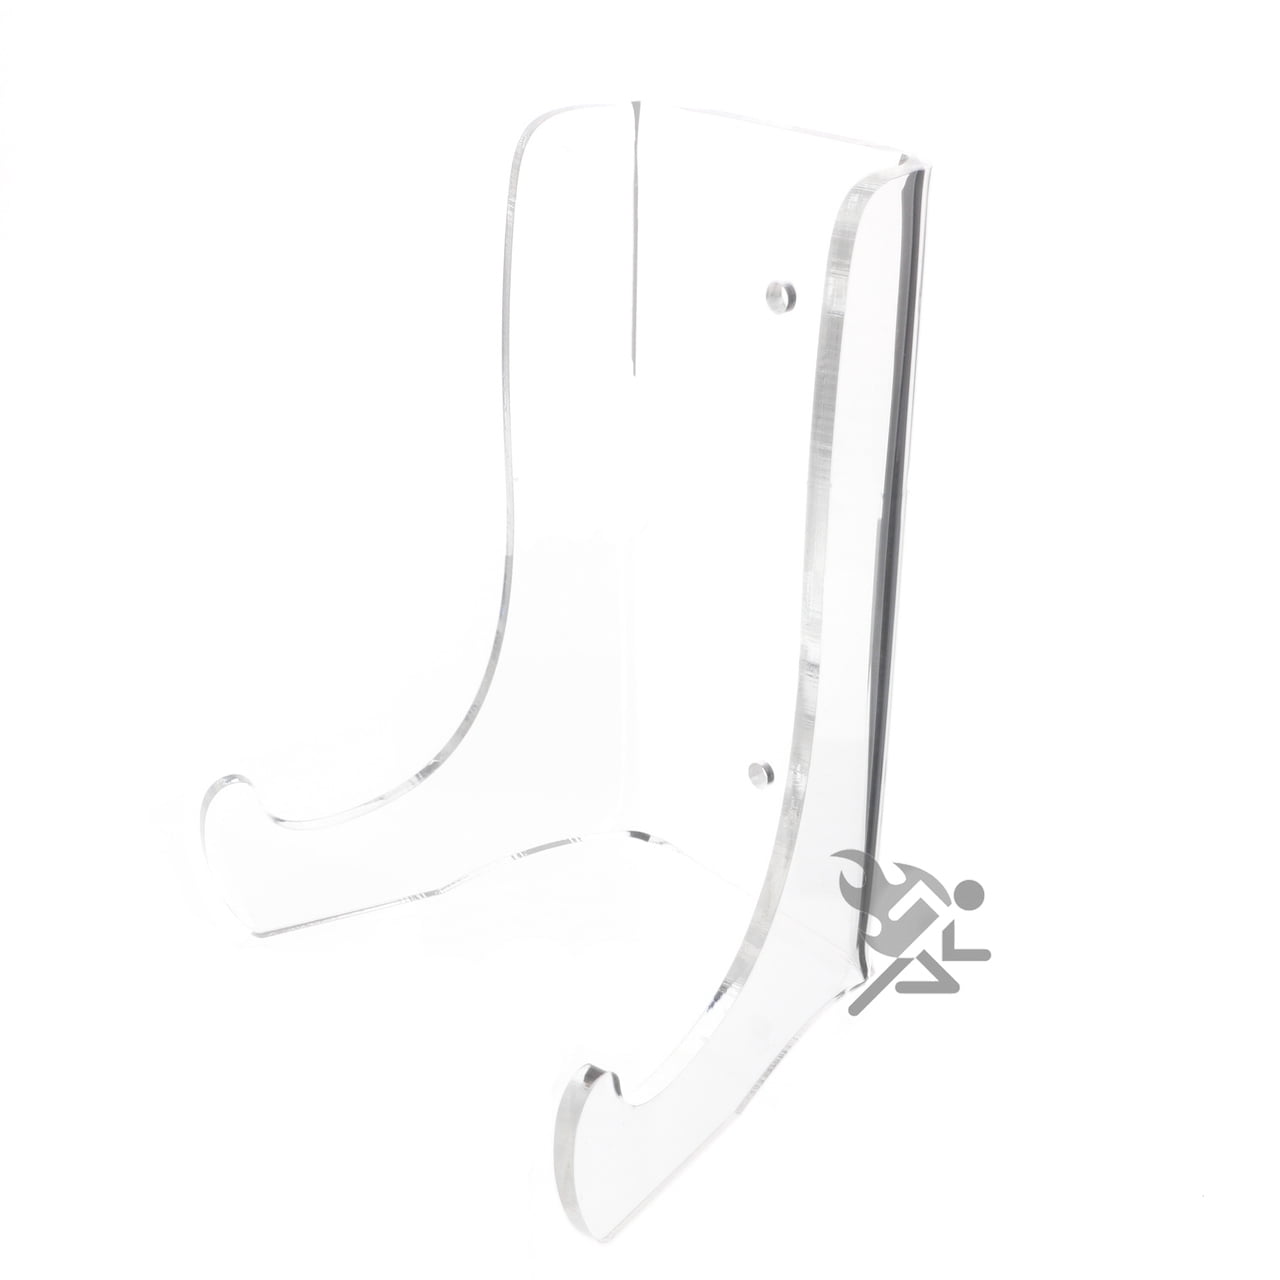 Clear Plastic Easels or Stand Plate Holders to Display Pictures or Others ueLDU 